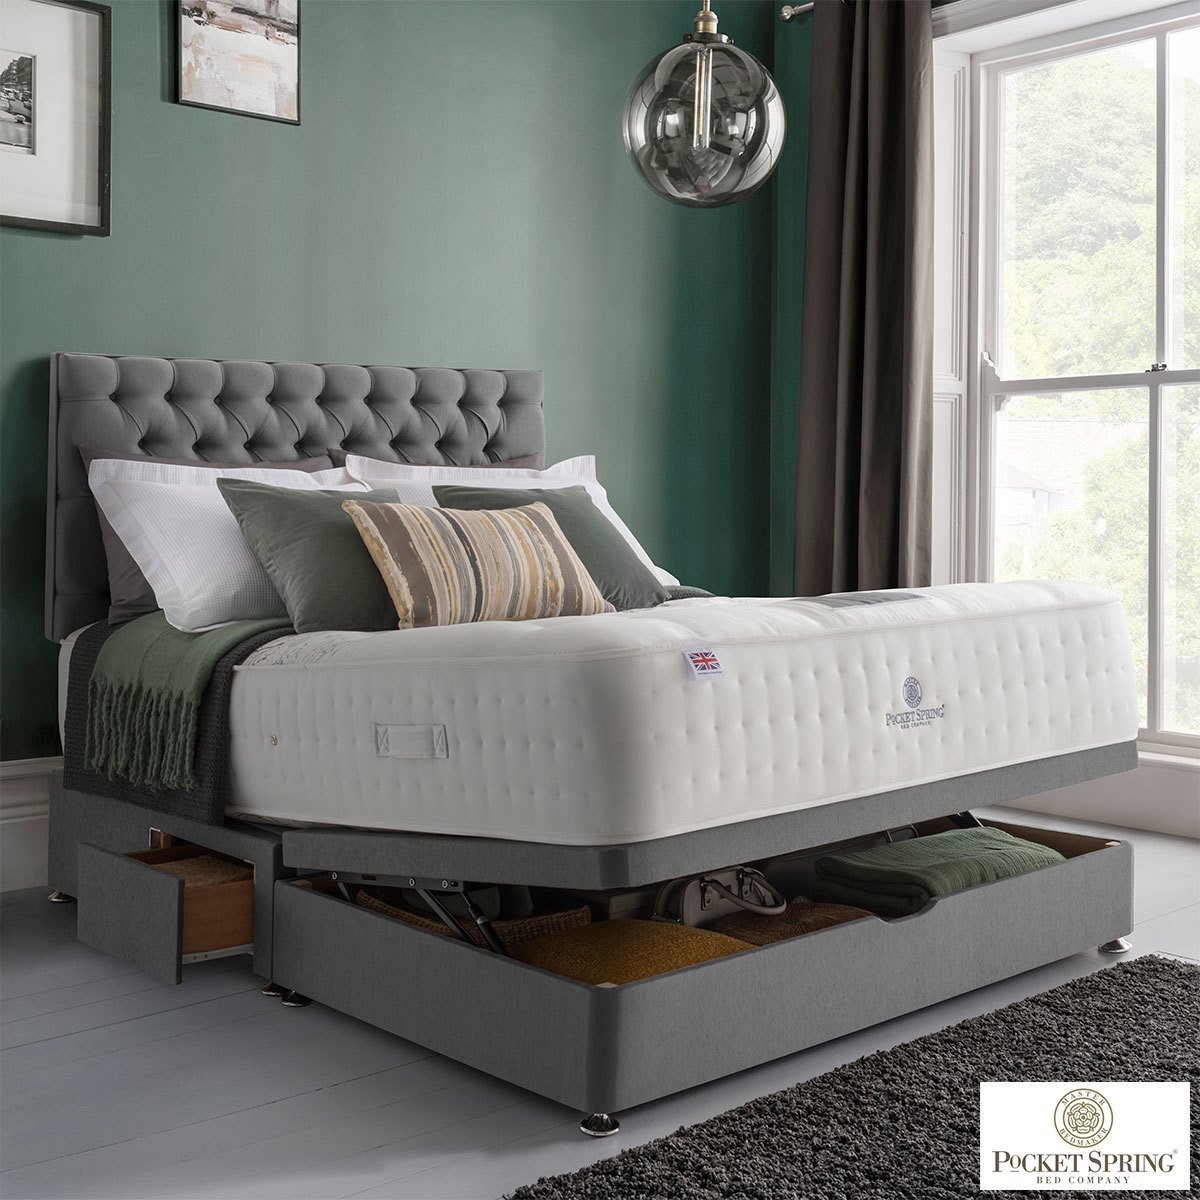 Pocket Spring Bed Company Mulberry Mattress & Grey Ottoman Divan in 3 Sizes - Signature Retail Stores